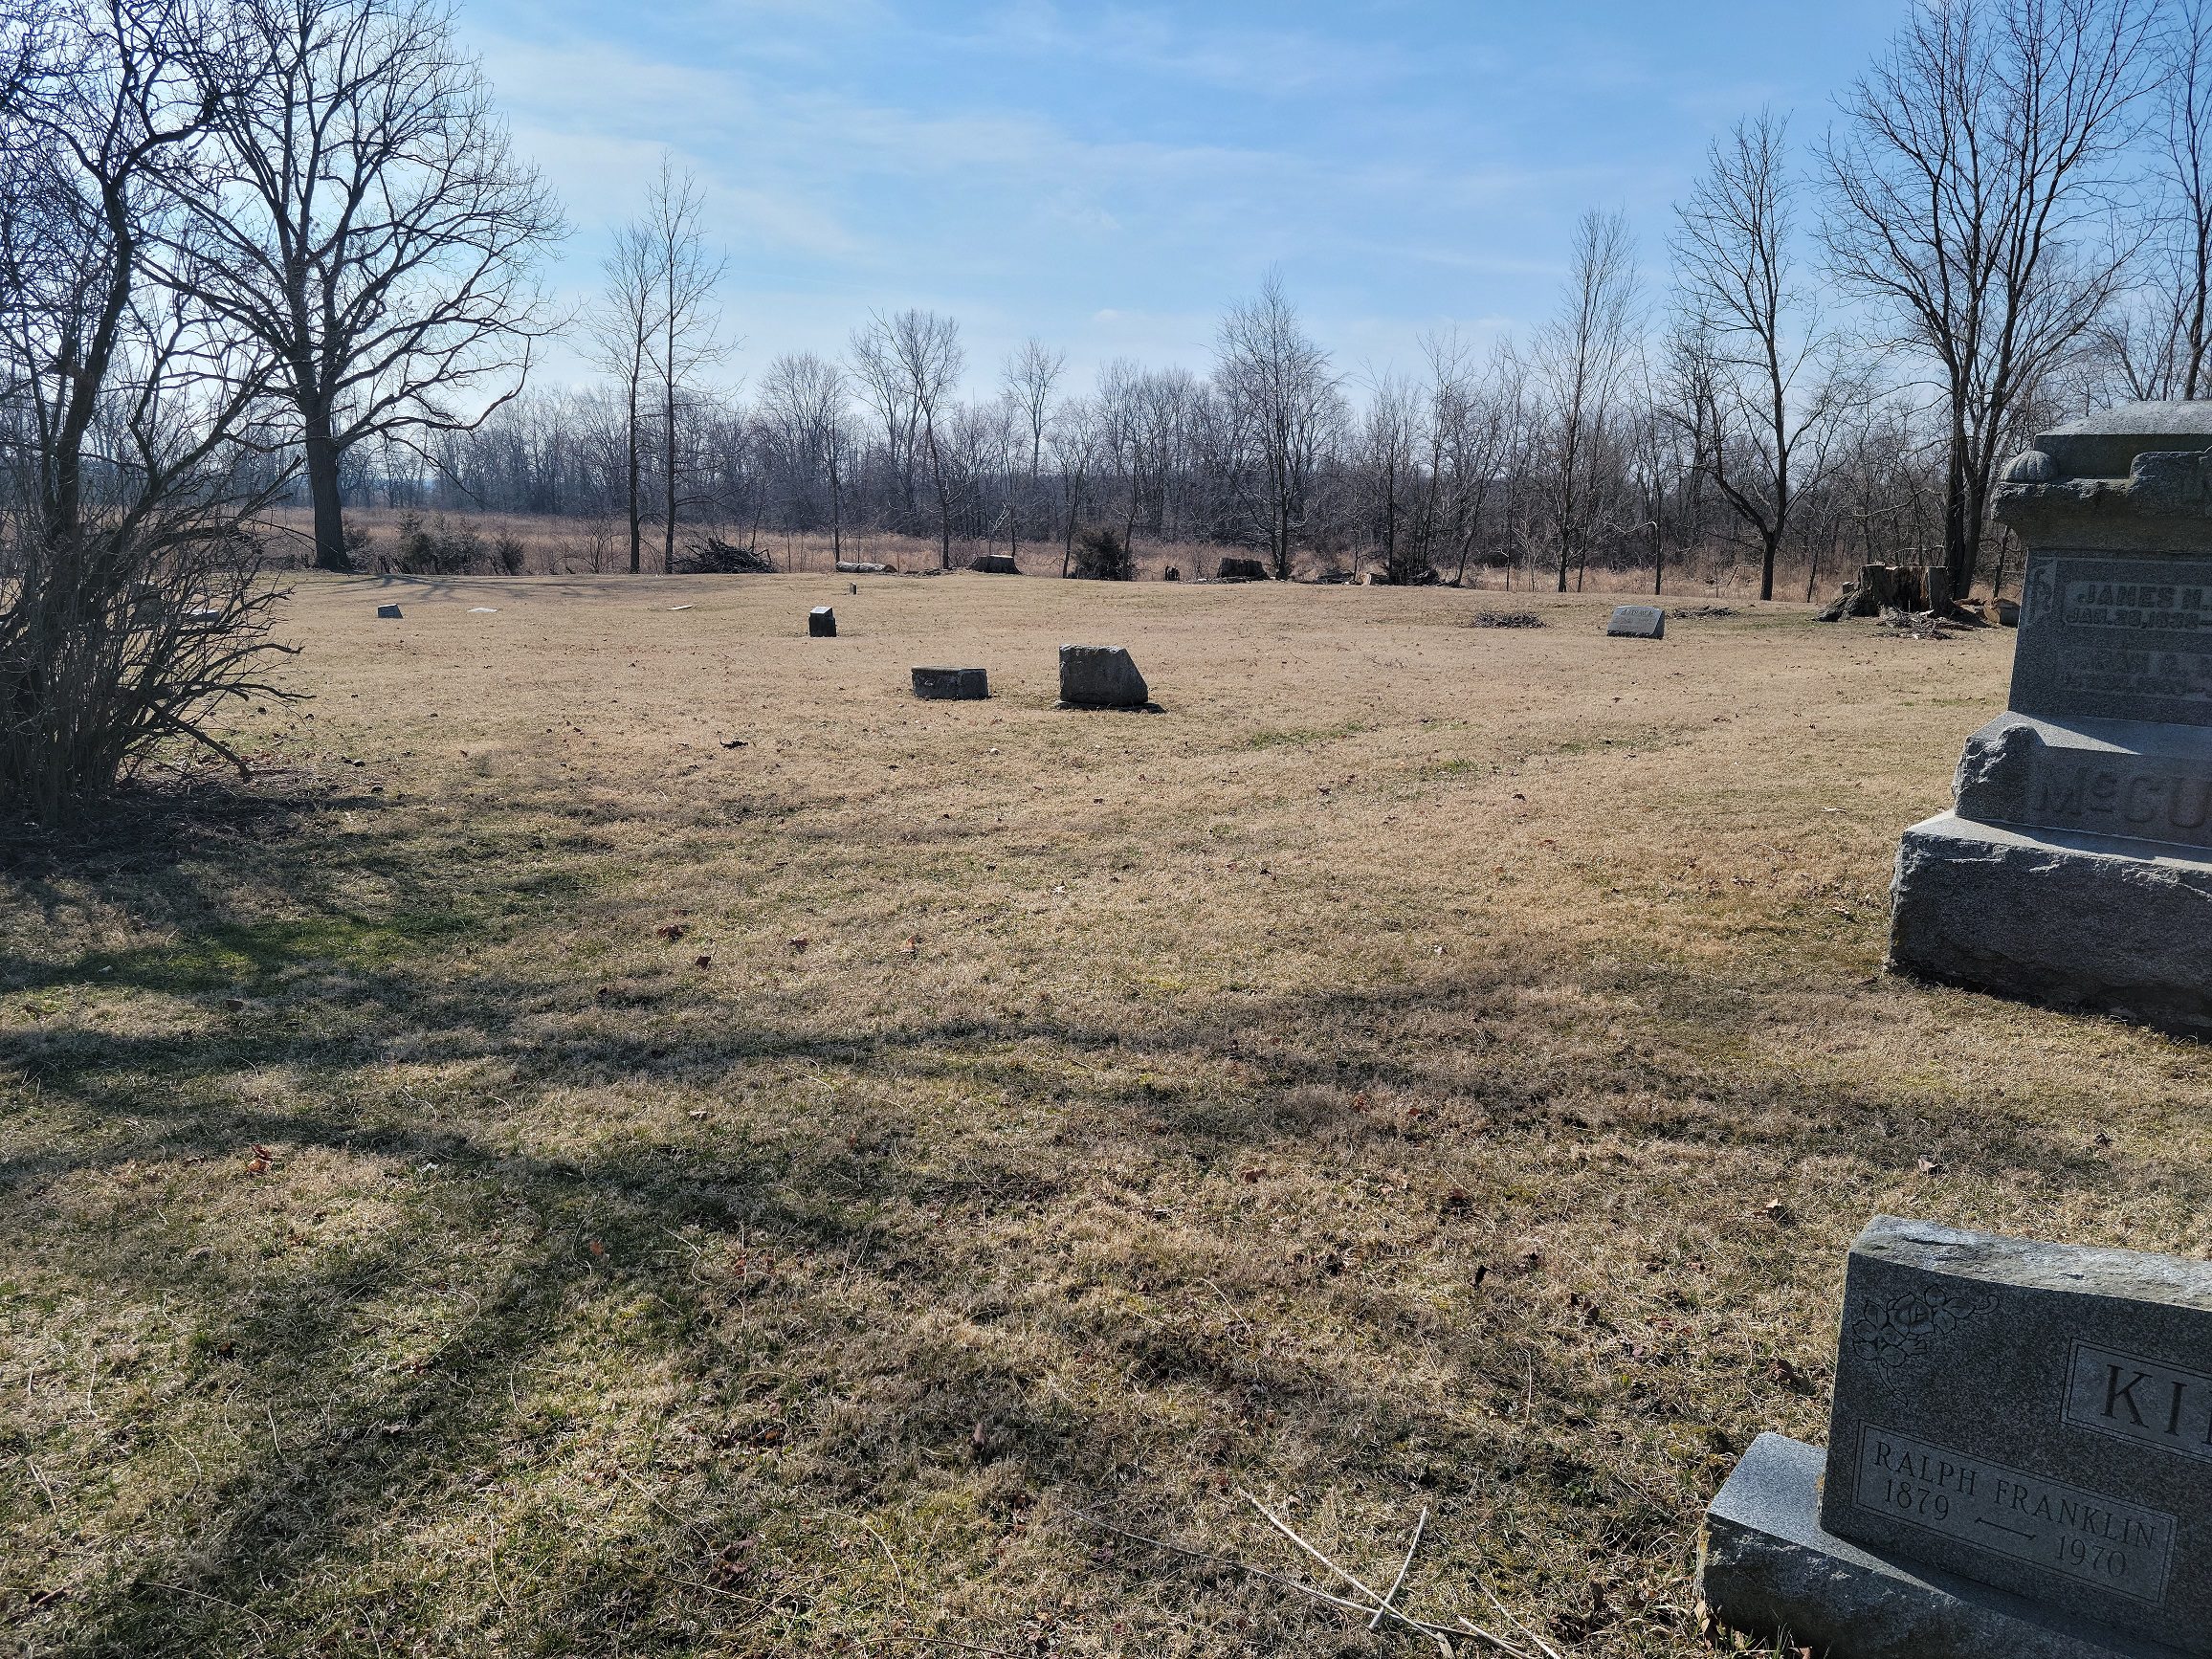 Overview of Section 7 of Claibourne Cemetery, Claibourne Township, Union County, Ohio, looking southwest.